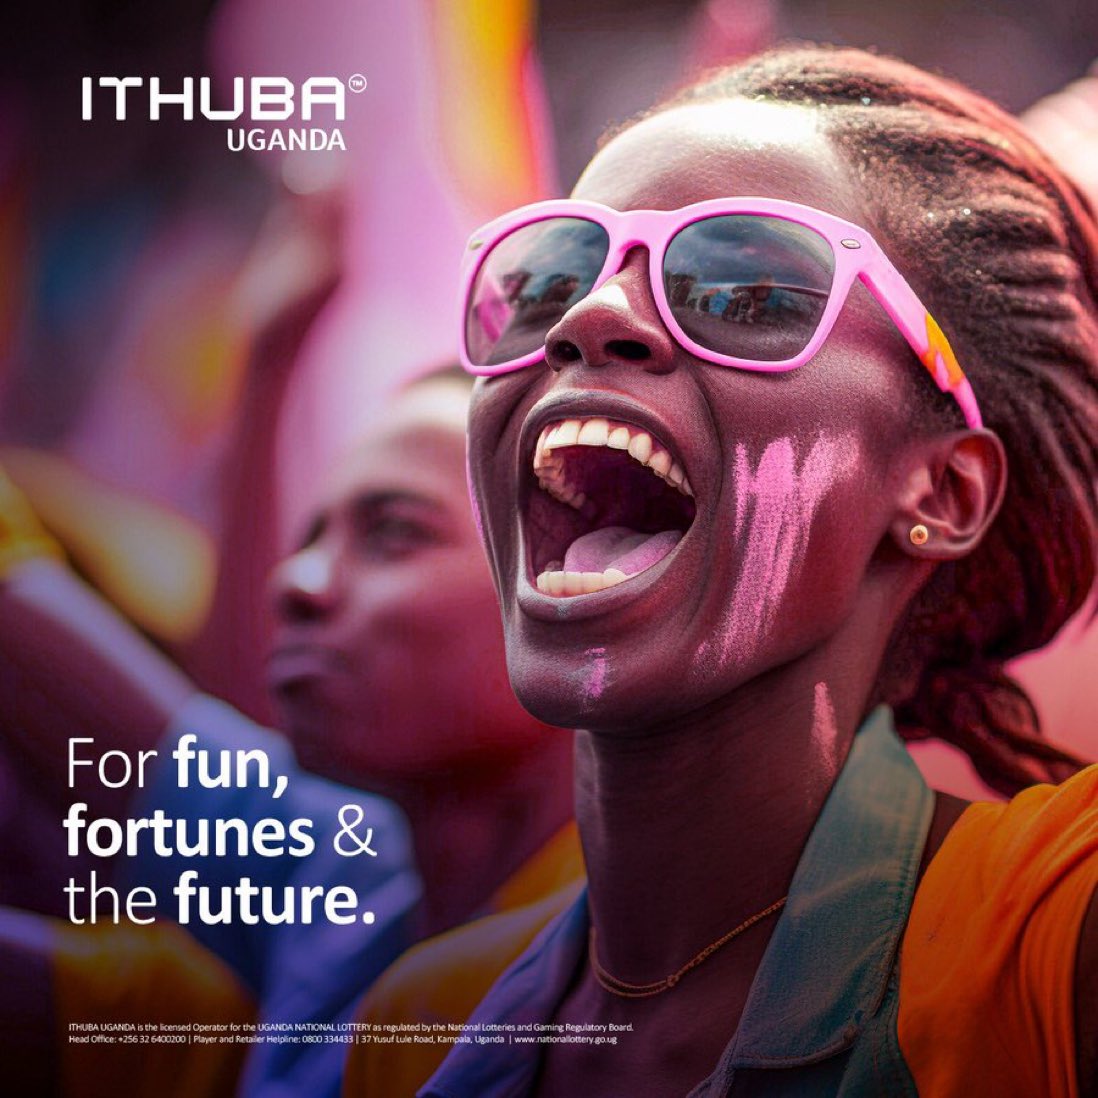 Try your luck and tell a successful story of your playing the Uganda National Lottery with #ITHUBAUganda.